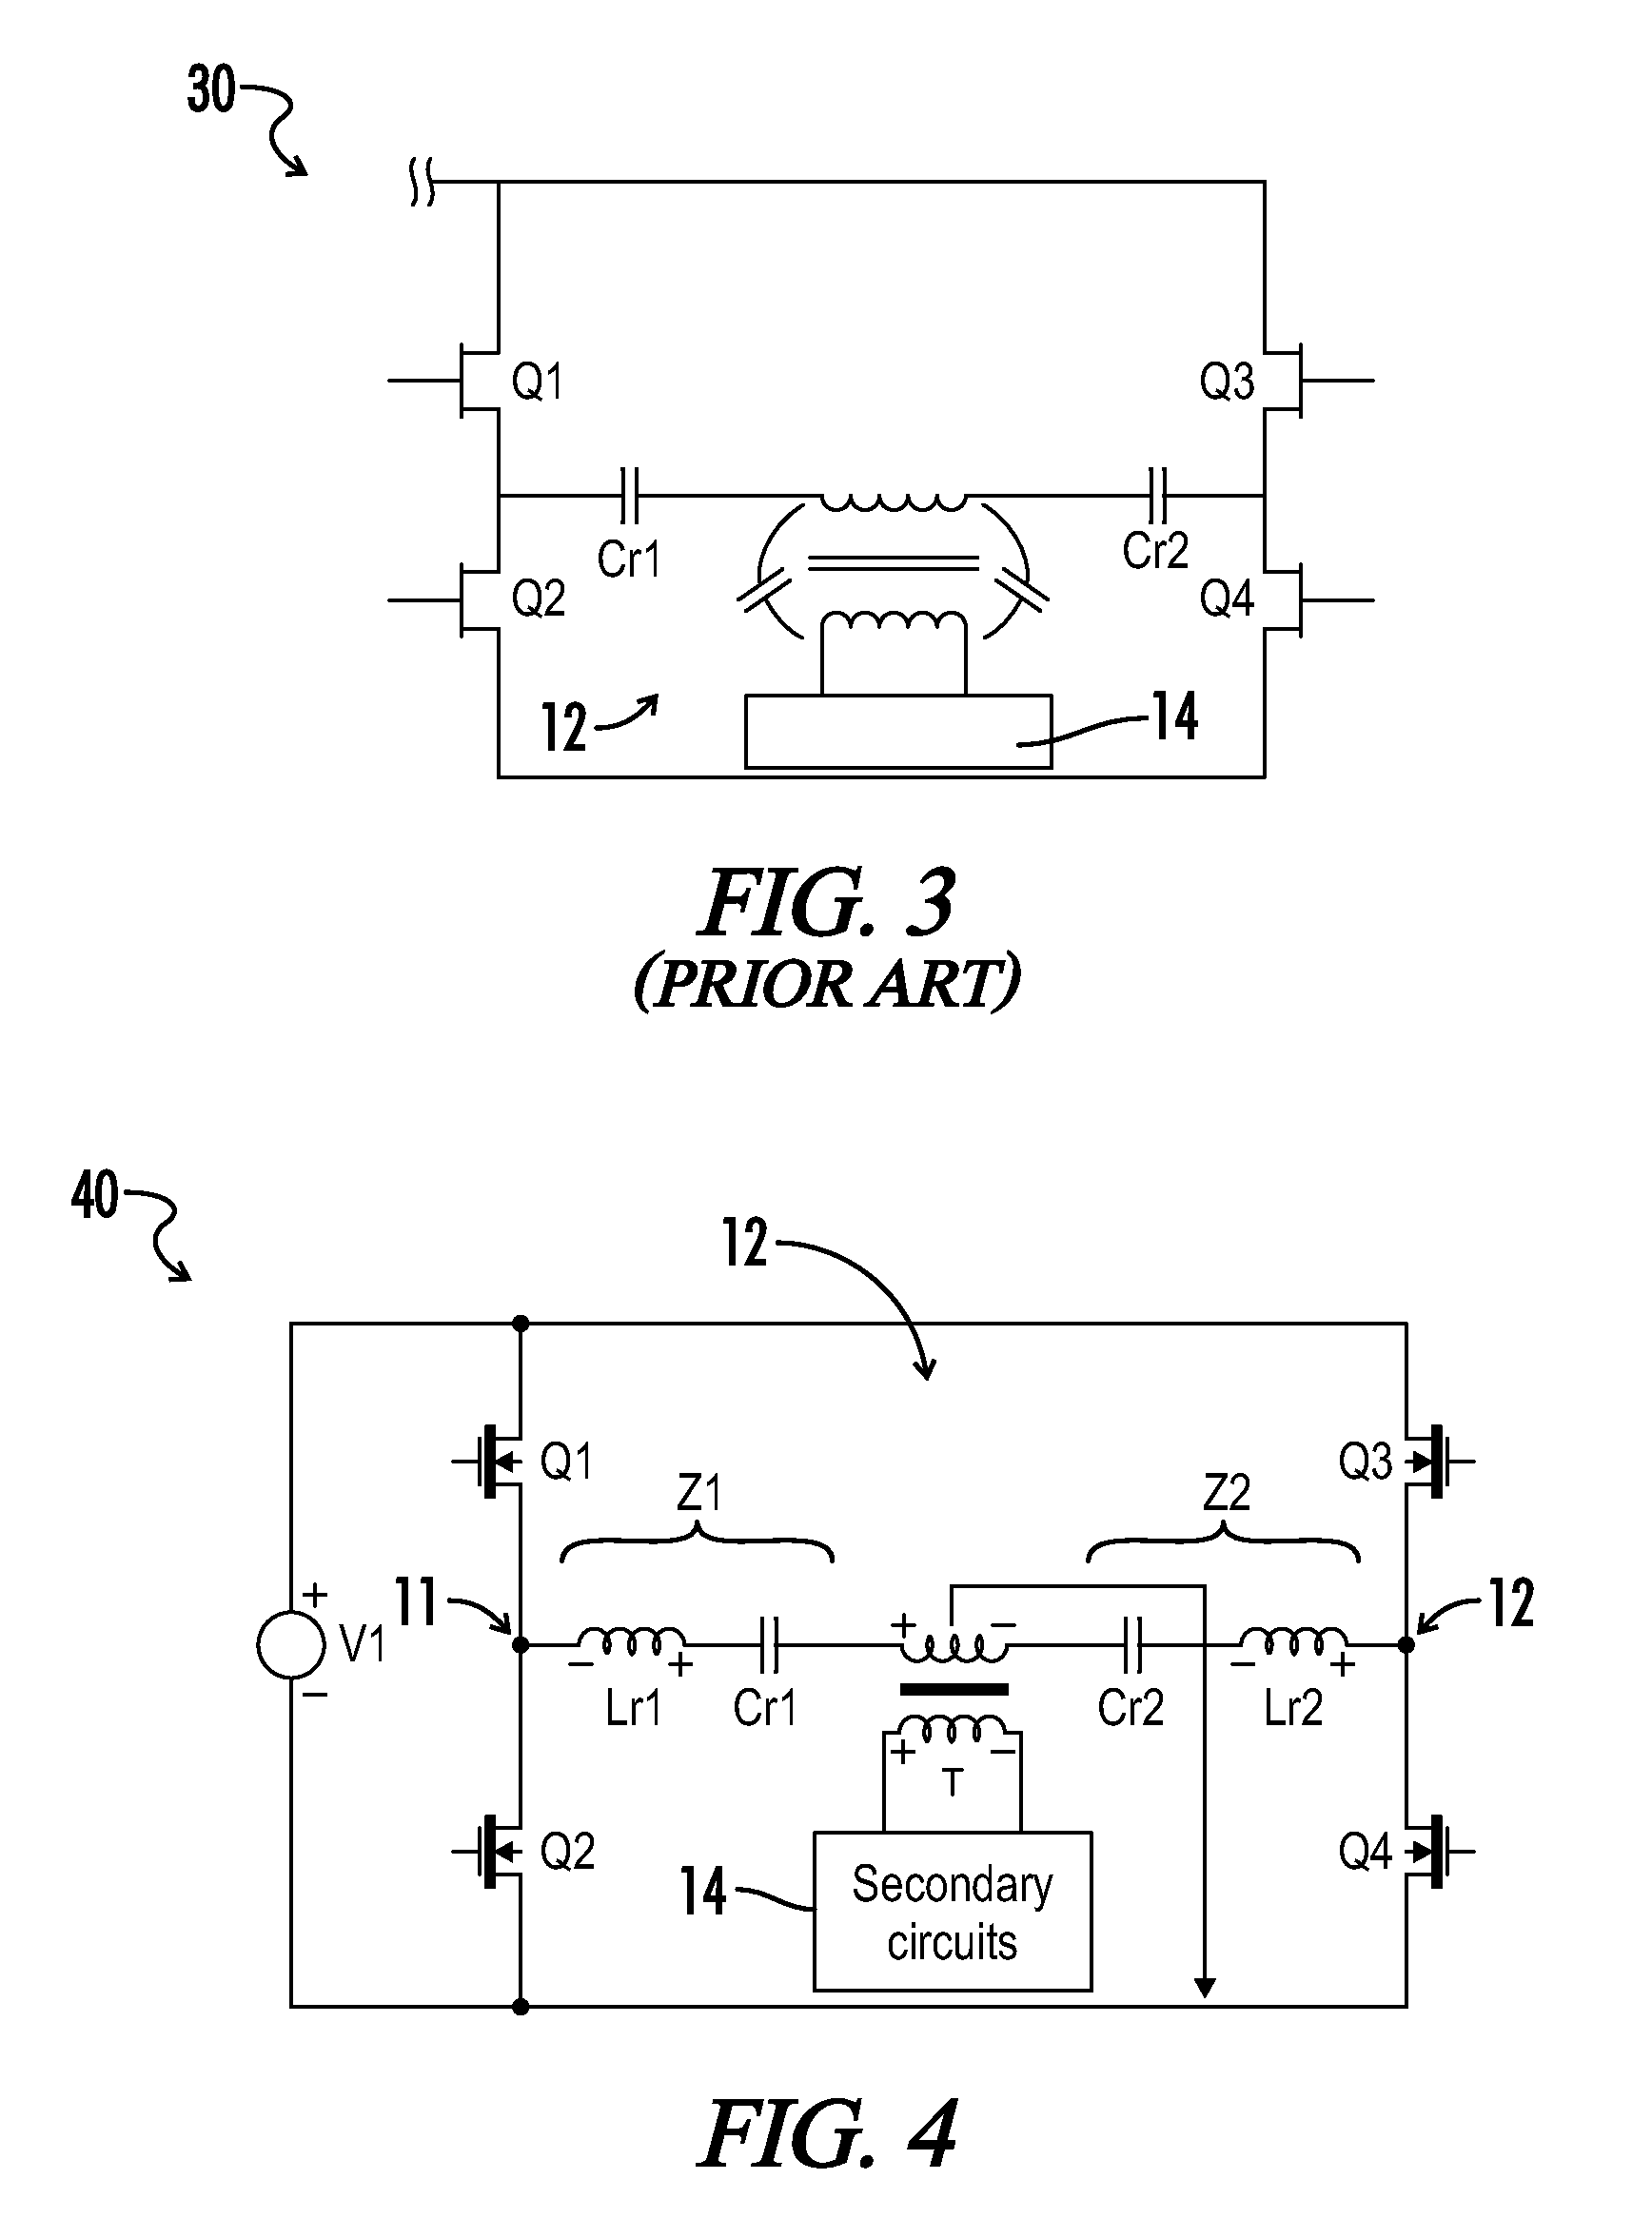 Circuit and method for managing common mode noise in isolated resonant DC-DC power converters